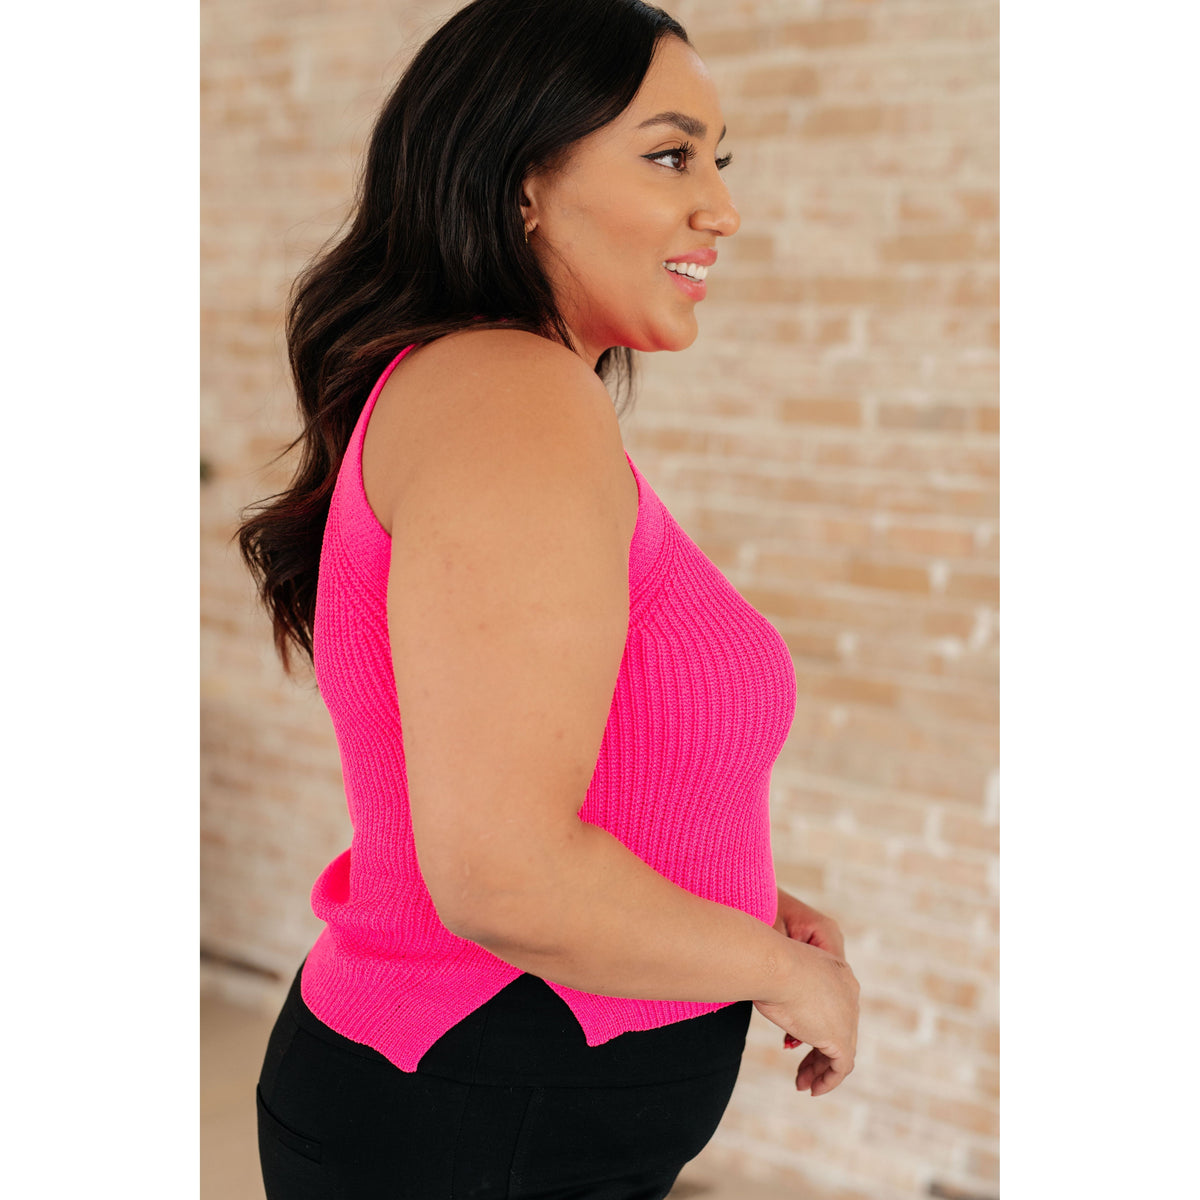 Previous Engagement Halter Neck Sweater Tank in Hot Pink - becauseofadi